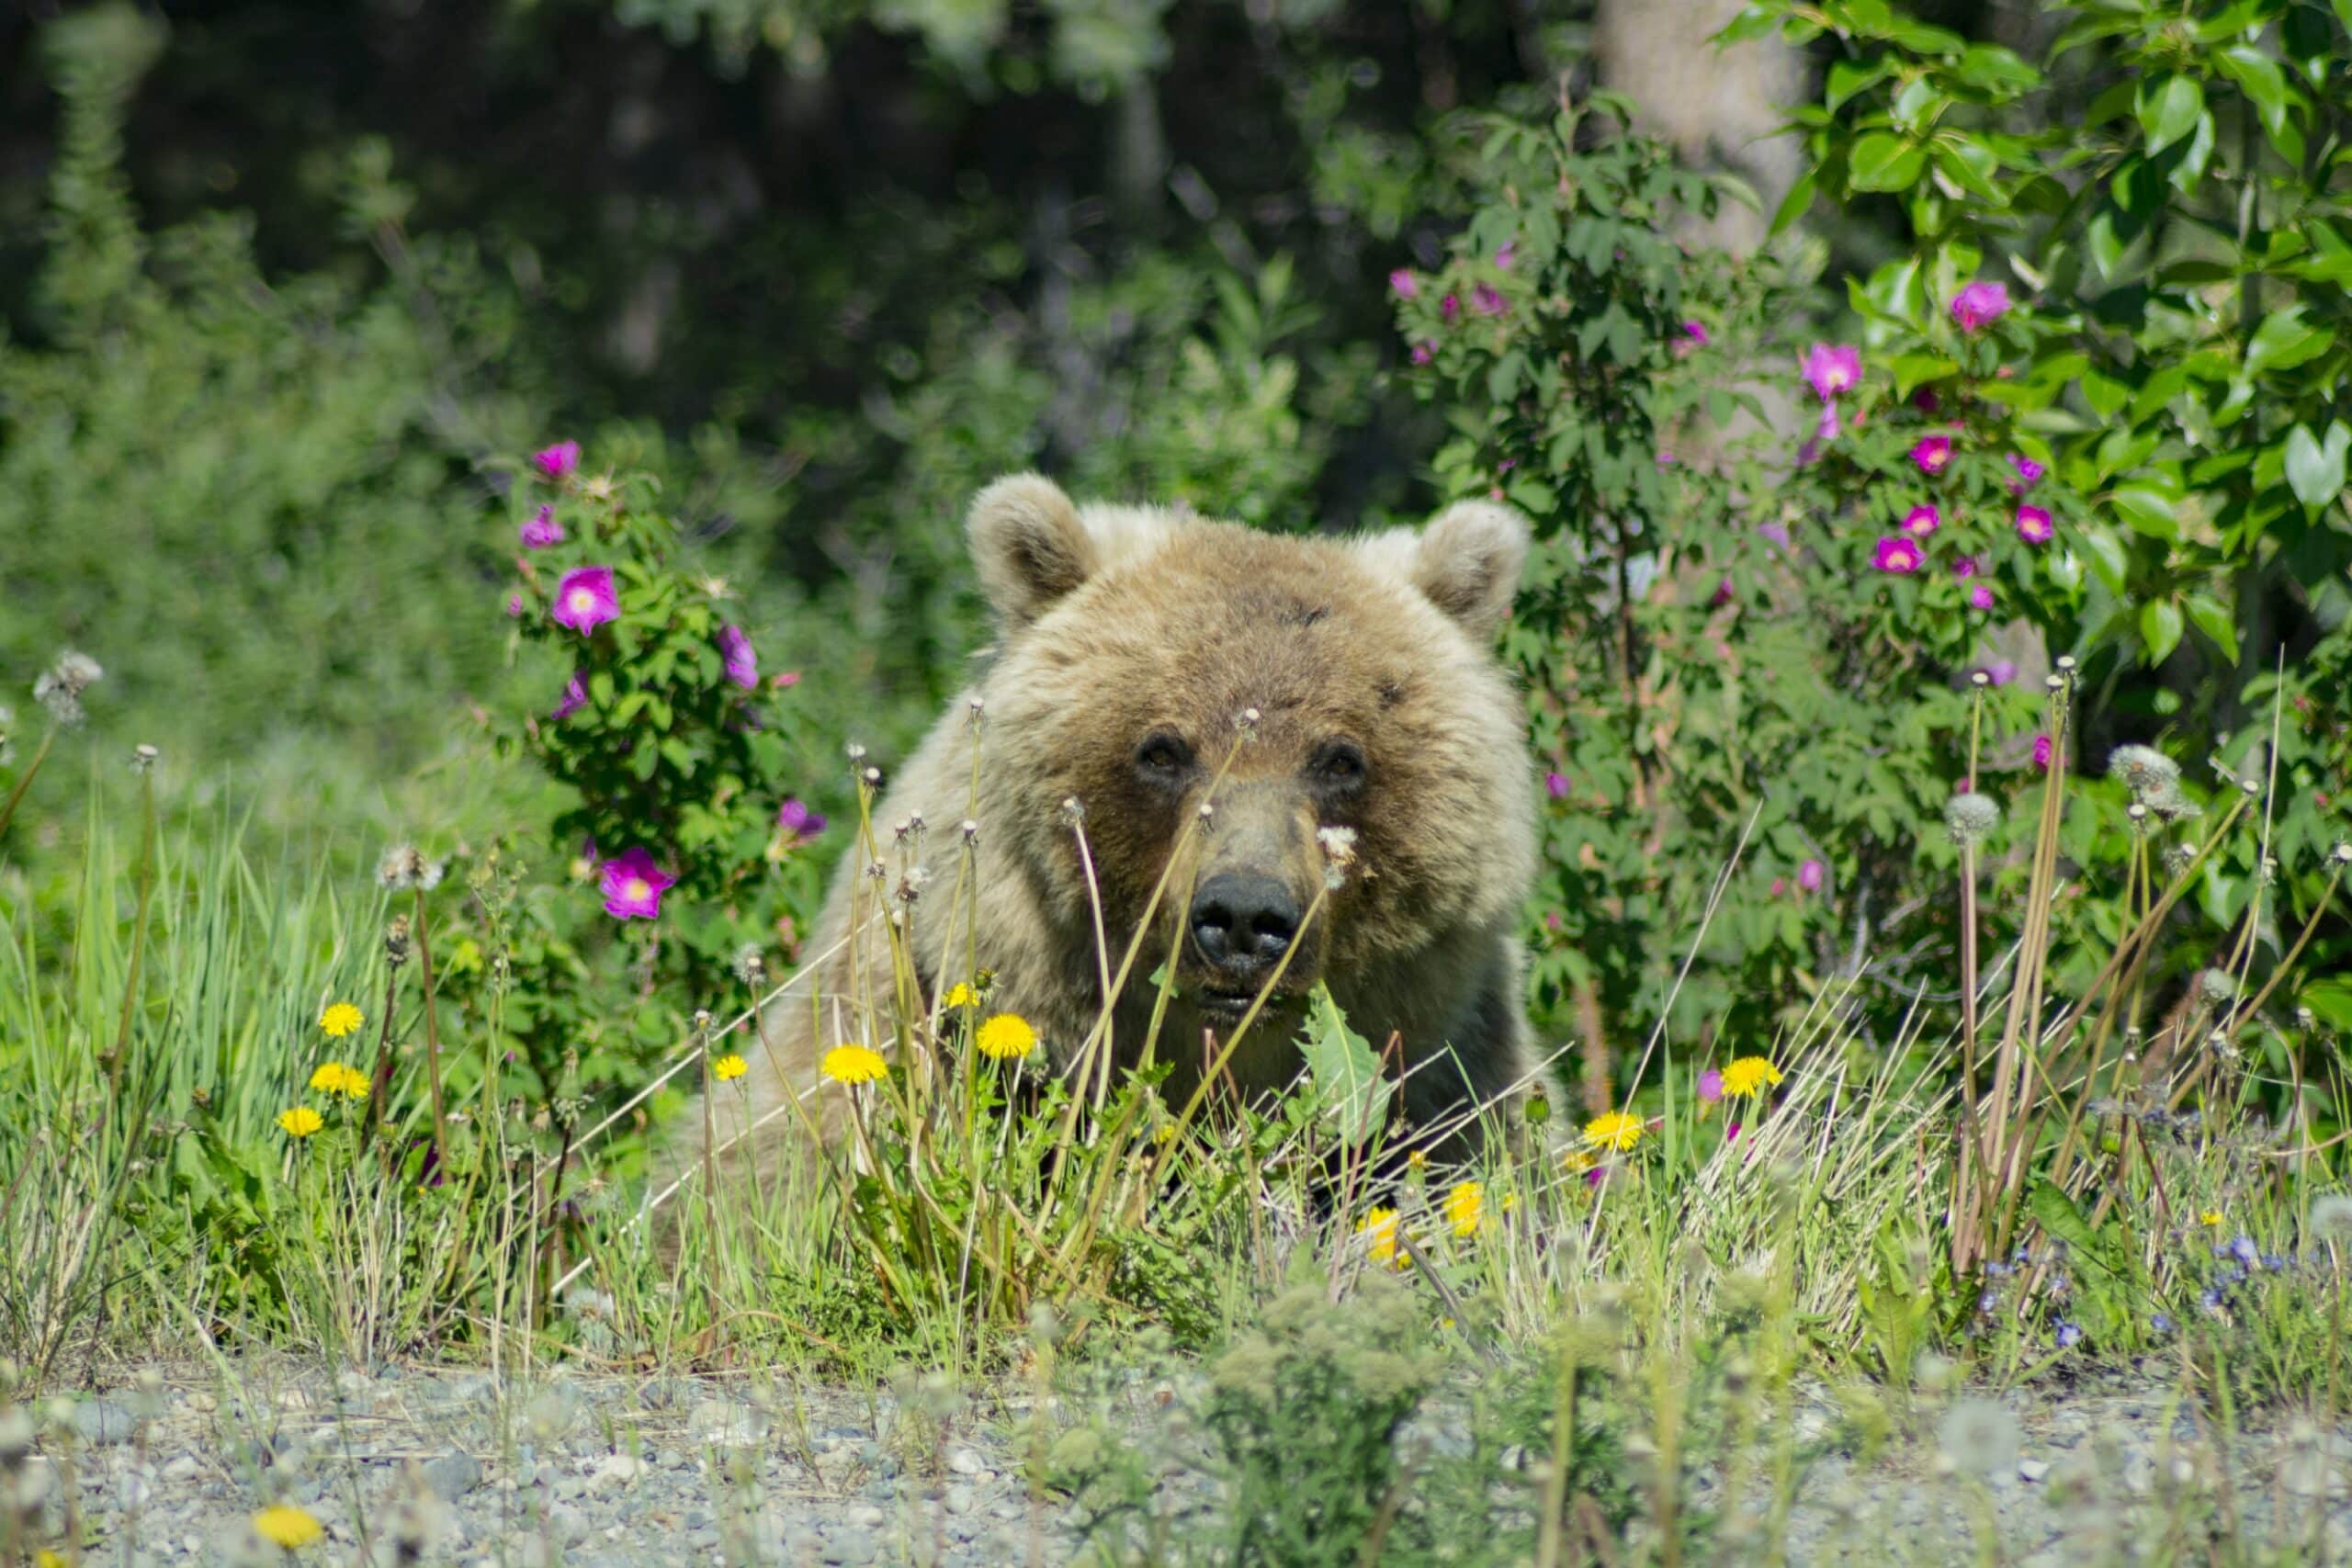 https://www.discovercanadatours.com/wp-content/uploads/2023/06/Tourism_Yukon_Sheena-Greenlaw_Grizzly_Bear_Alaska-_Highway_near-_Haines_Junction-scaled.jpg